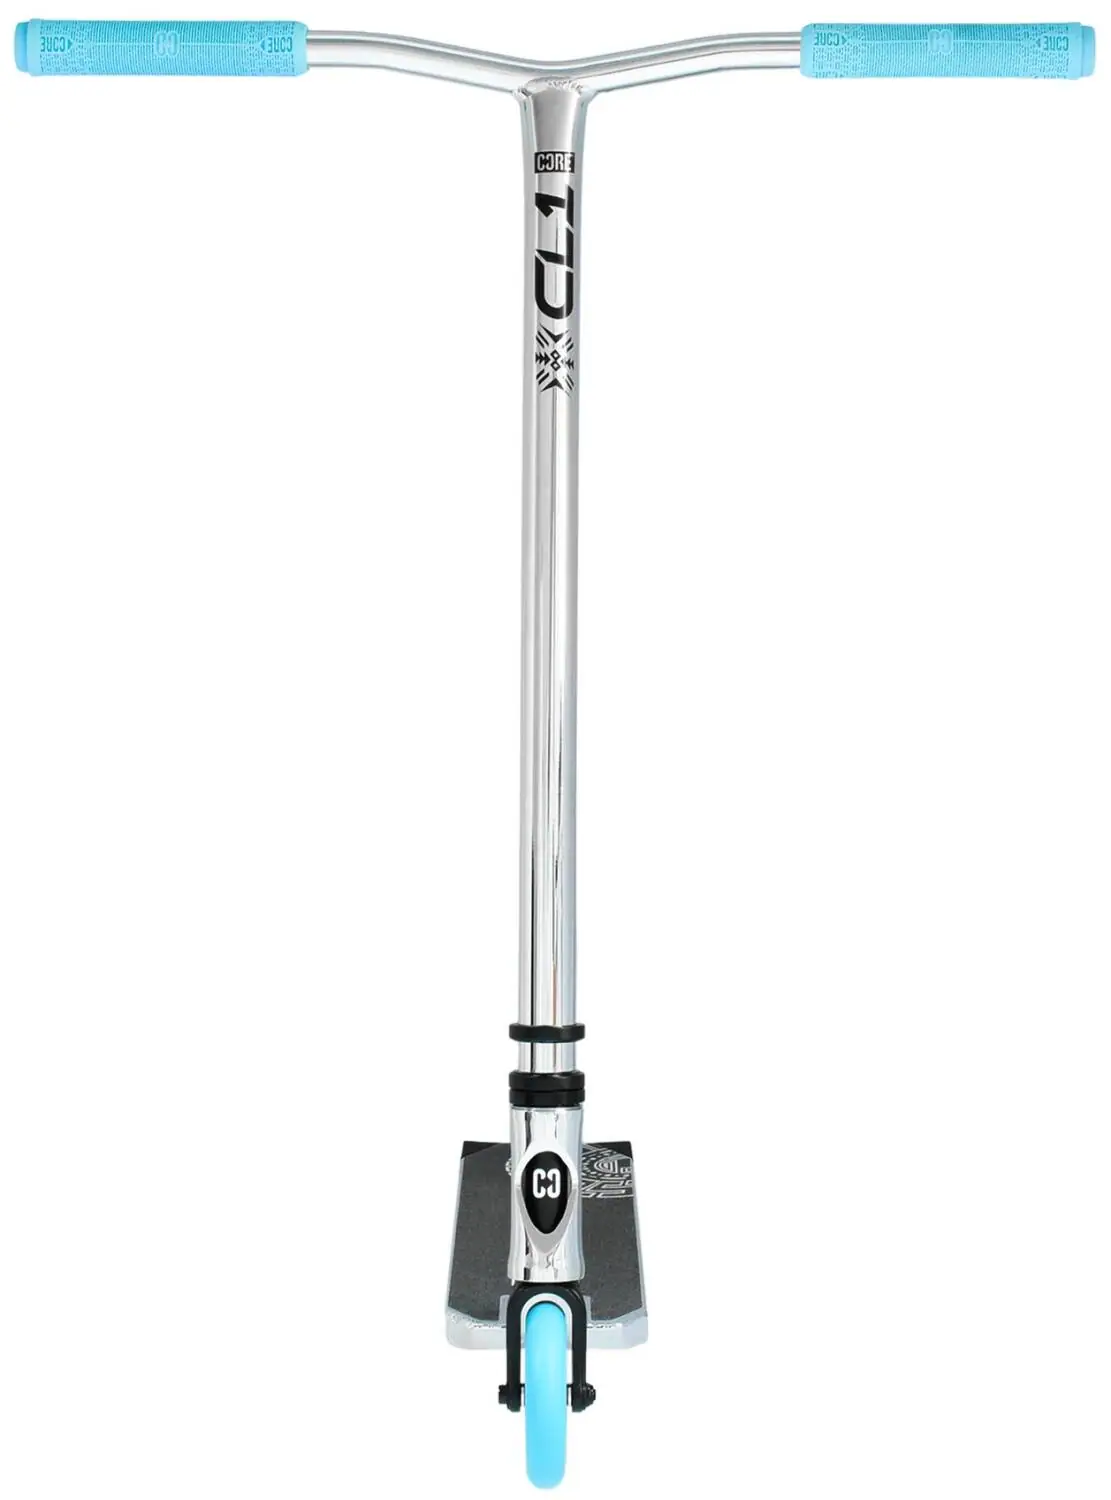 CORE CL1 Pro Scooter